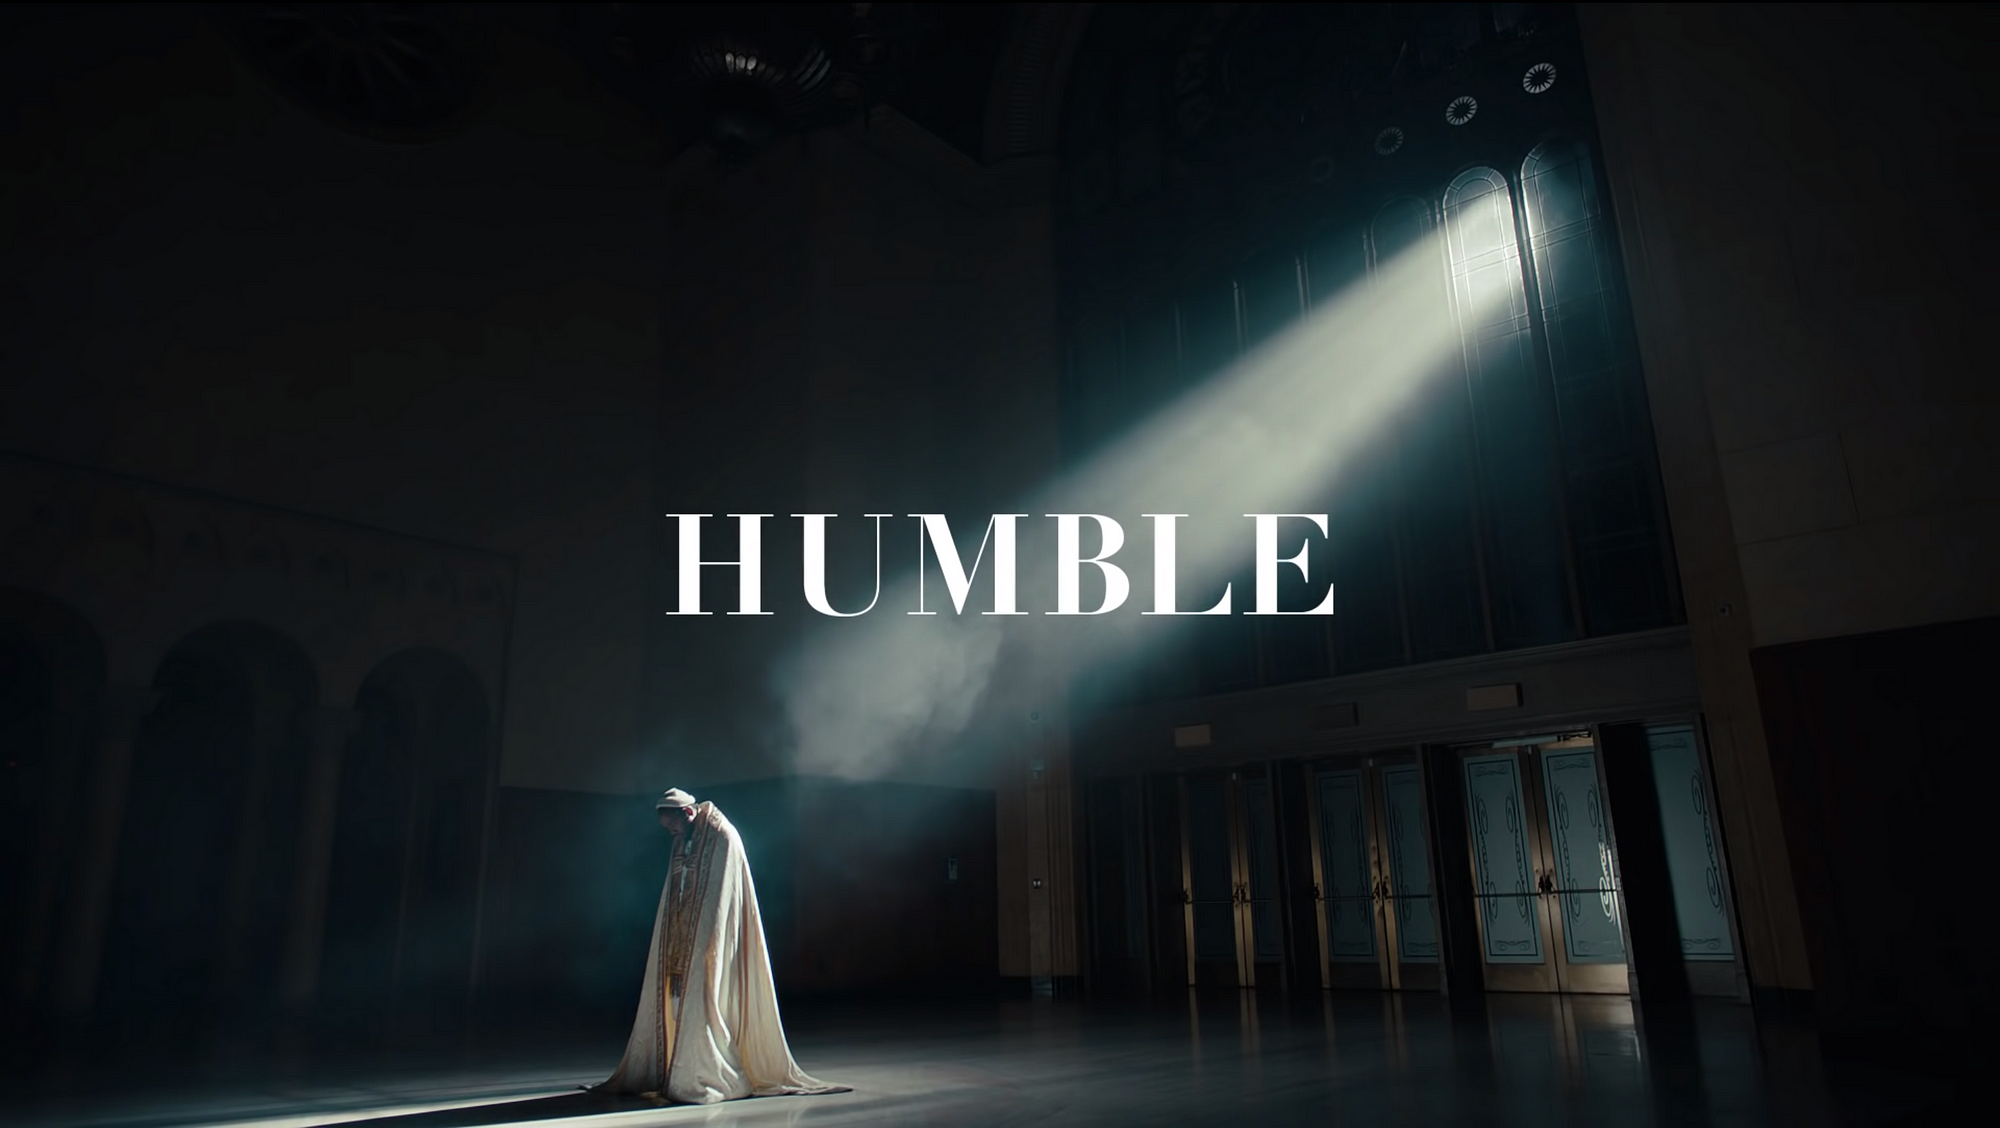 Reflections on Dissections S5E11 — “HUMBLE.” by Femi